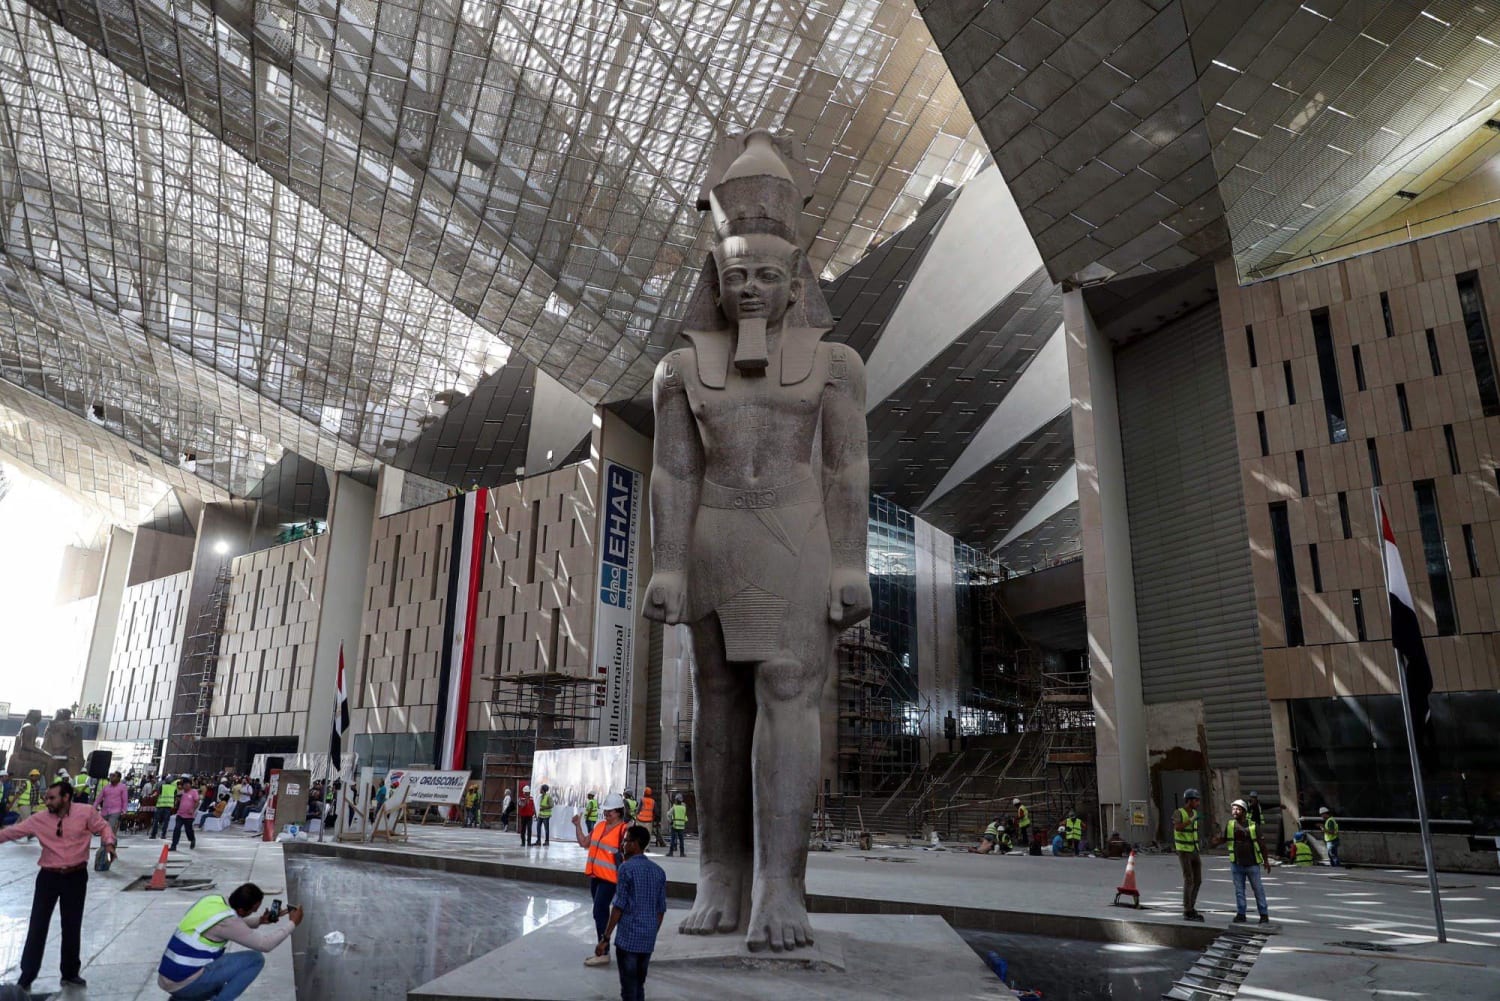 The colossal statue of Ramesses II at the Grand Egyptian Museum